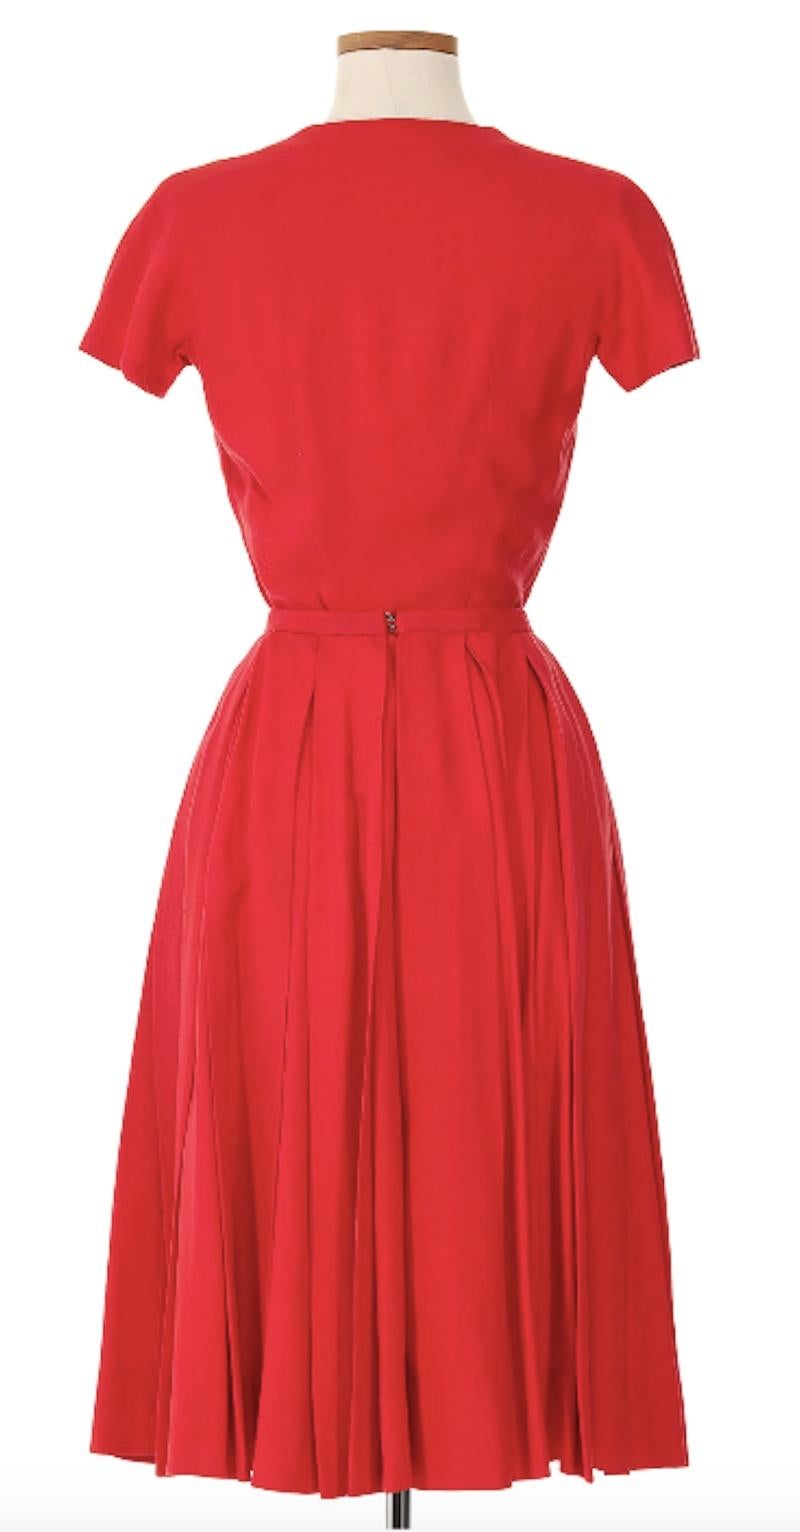 Balenciaga Red Skirt Suit circa 1960s. From the golden age of Cristóbal Balenciaga, this vibrant red skirt suit exudes the femininity and elegance of 60s fashion. Perfectly tailored to the waist with intricate pleating along the skirt. This ensemble